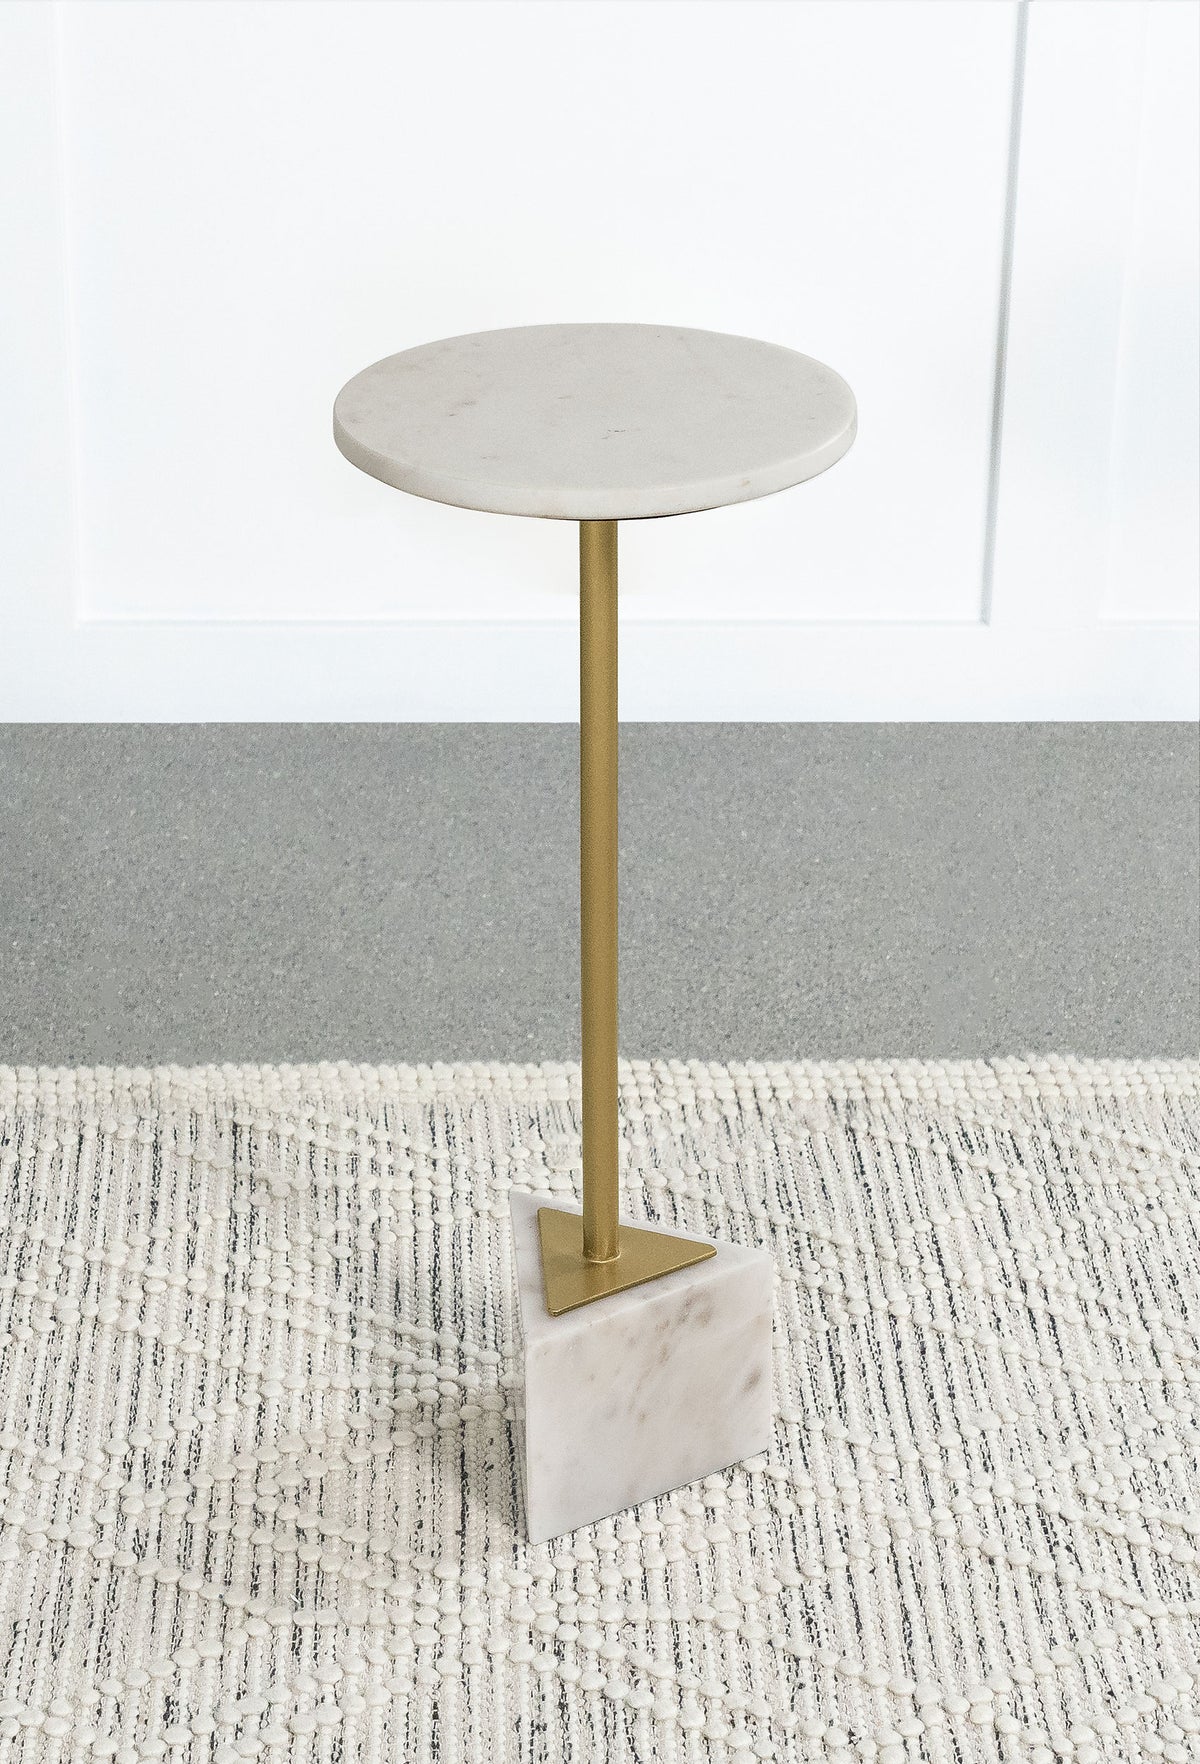 Fulcher Round Metal Side Table White and Gold  Half Price Furniture